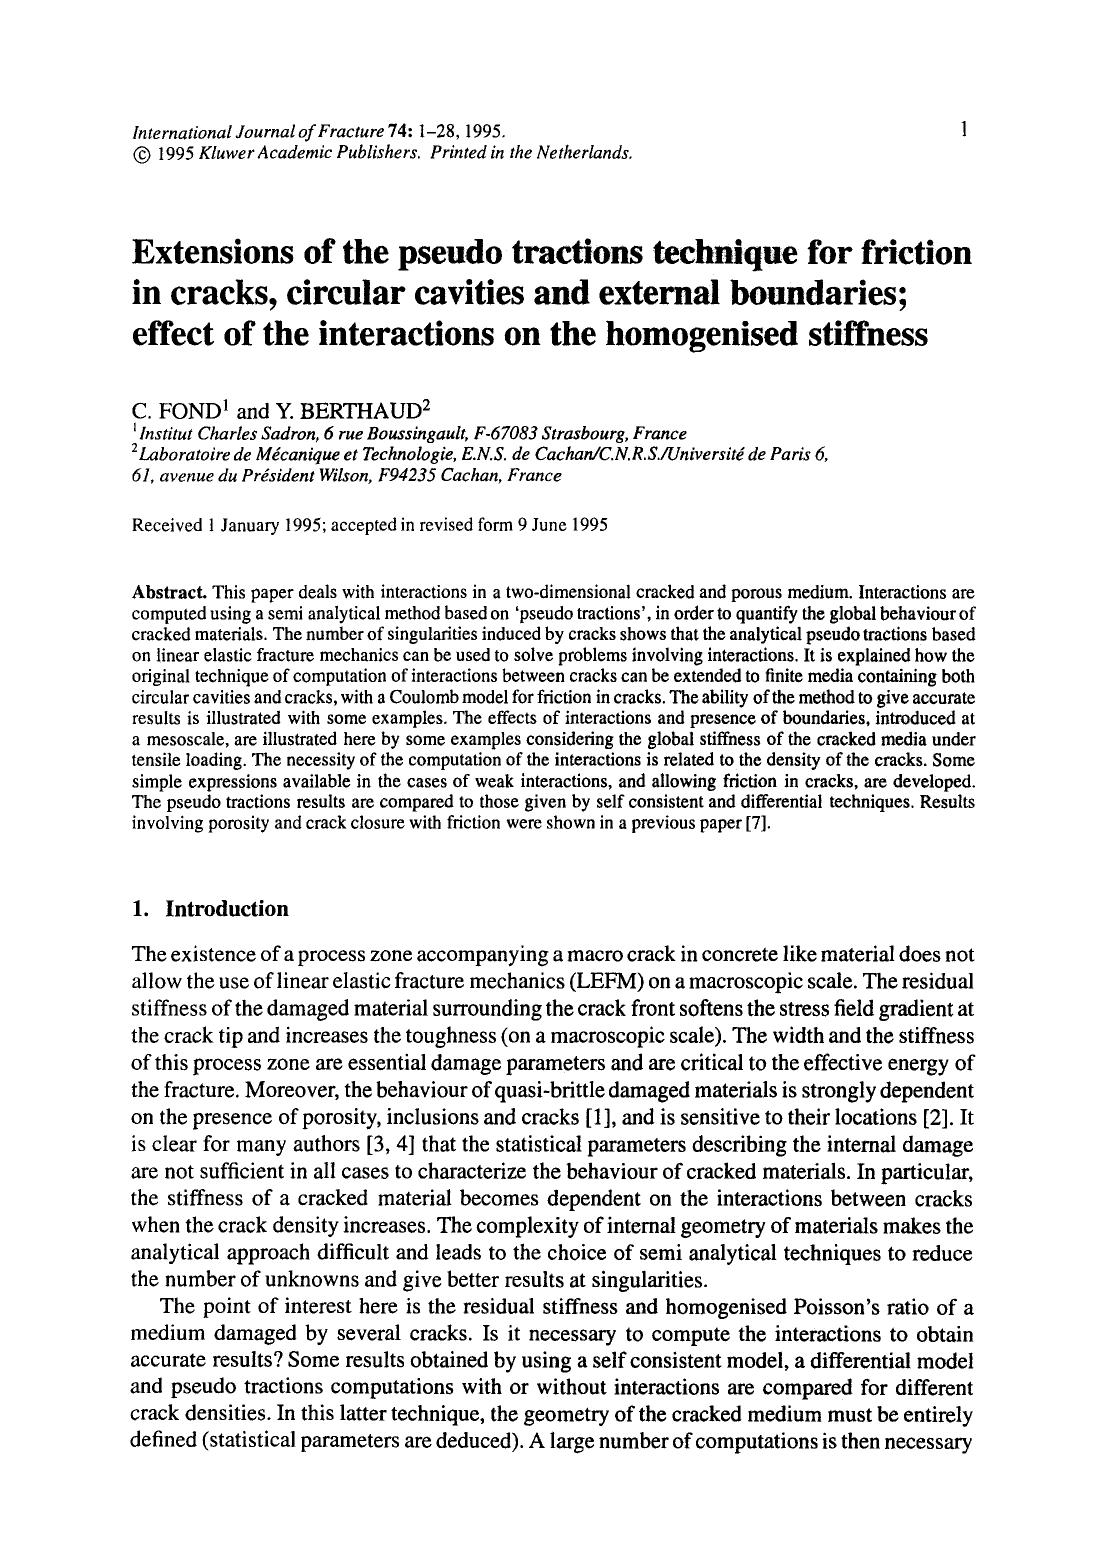 Extensions of the pseudo tractions technique for friction in cracks, circular cavities and external boundaries; effect of the interactions on the homogenised stiffness by Unknown